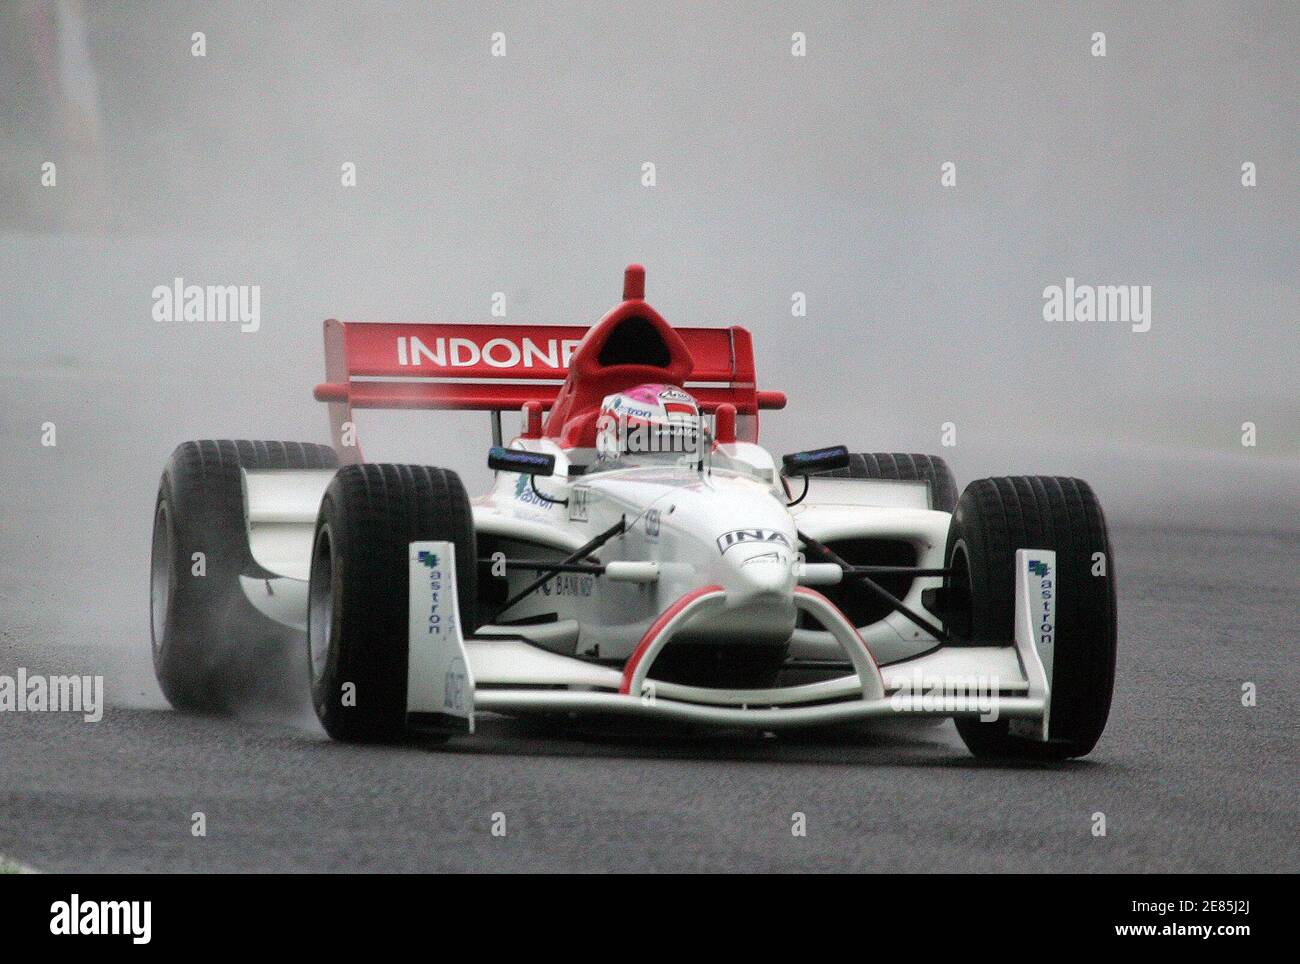 Indonesia A1 driver Ananda Mikola drives his car on the wet track during the official practice session of the A1 Grand Prix Championship at the Sentul circuit in Bogor, West Java province, February 10, 2006. Malaysian driver Alex Yoong recorded the fastest speed during the practice session on a wet track in heavy rain. REUTERS/Beawiharta Stock Photo